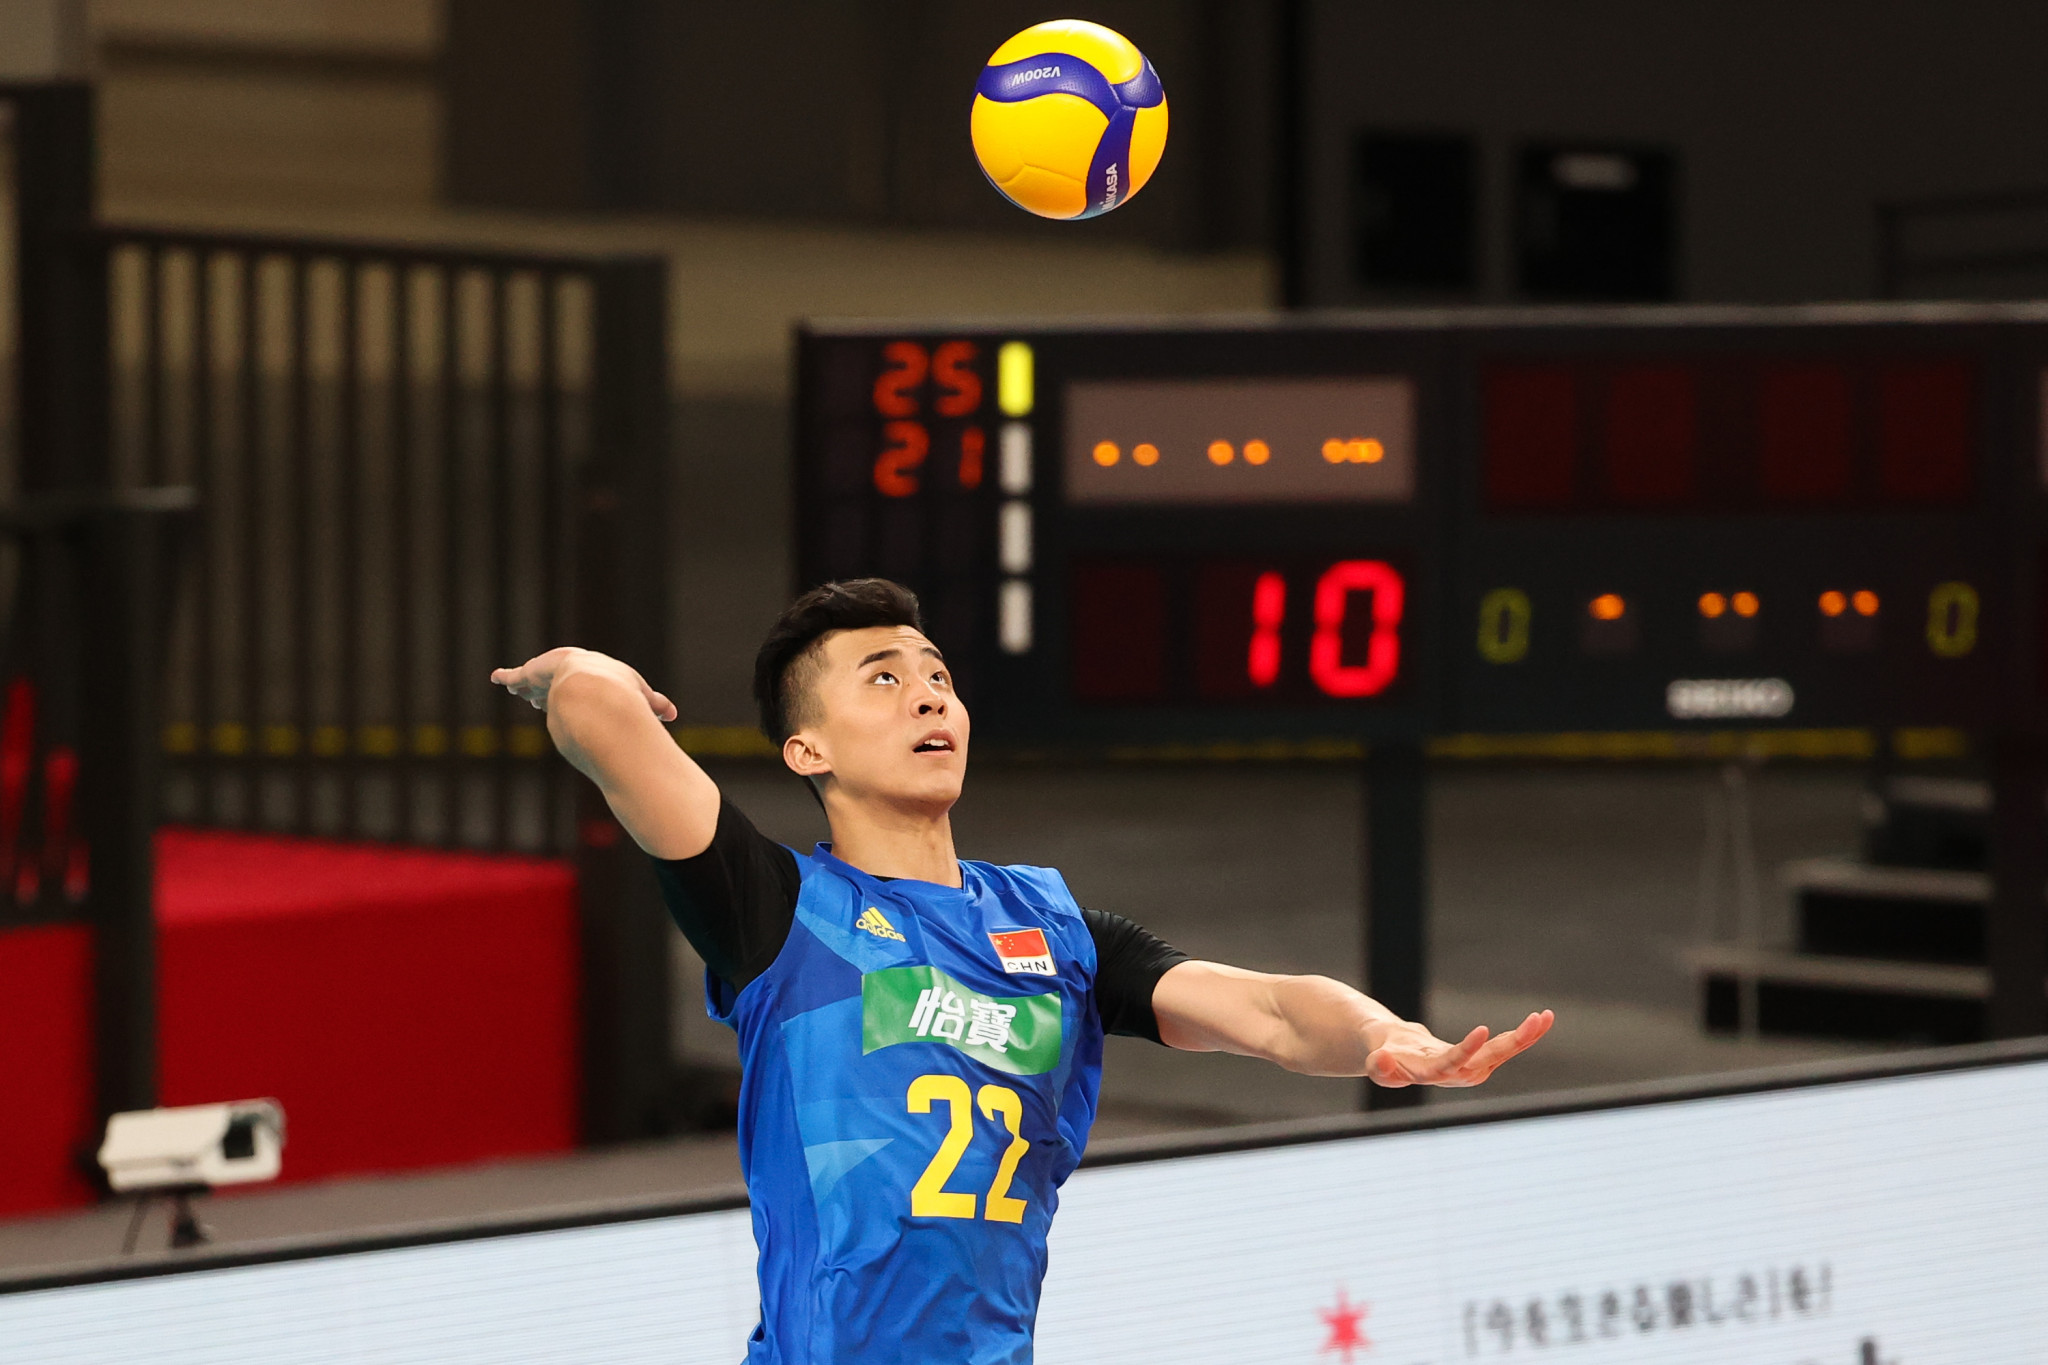 Zhang Jingyin was named MVP as China won the Asian Men's Volleyball Cup ©Getty Images